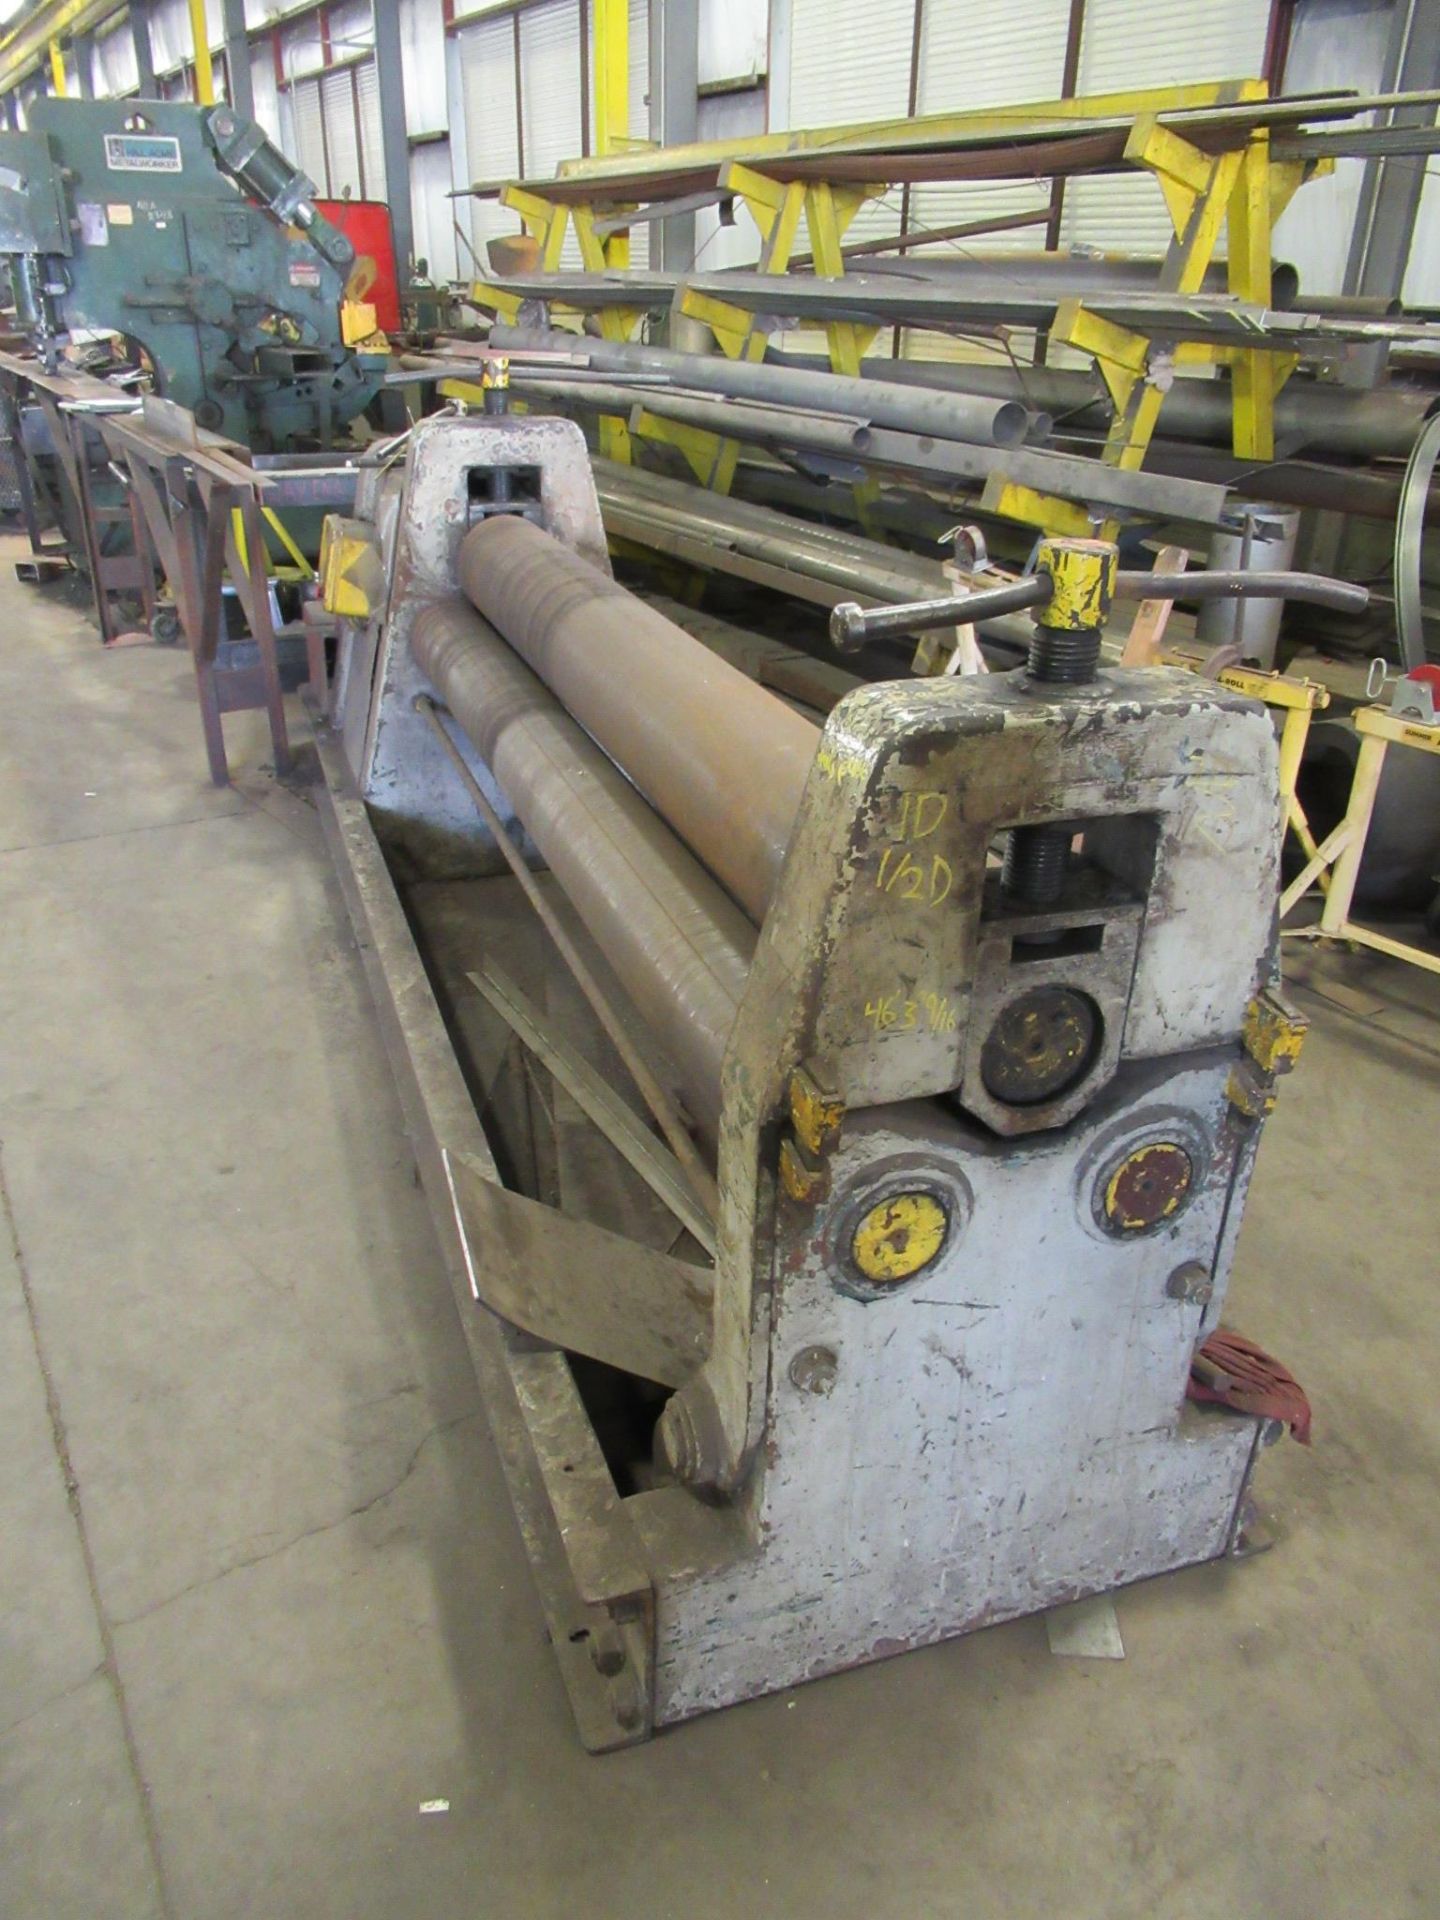 PLATE ROLL, ¾” X 8’, 9” top roll (Location 7: McCorvey Industrial Fabrication, 8610 Wallisville - Image 3 of 4